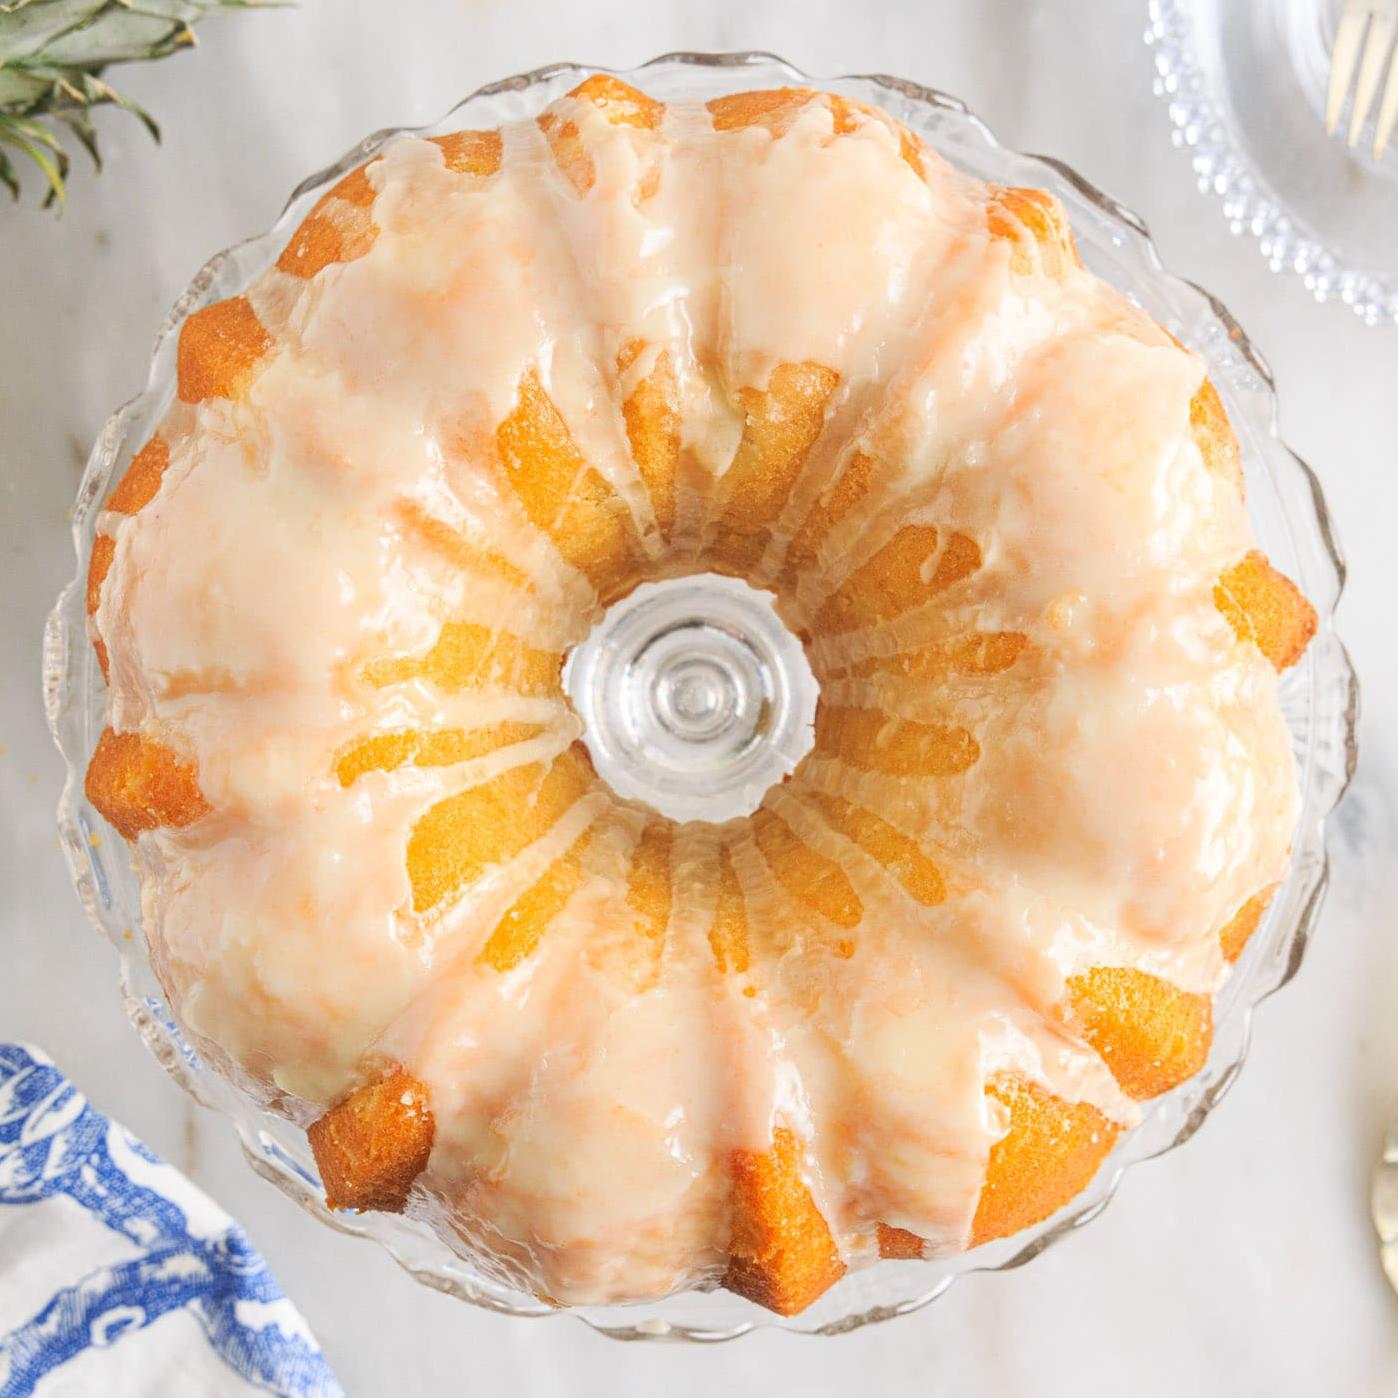  The golden brown crust of this cake pairs perfectly with the vibrant colors of pineapples and oranges.